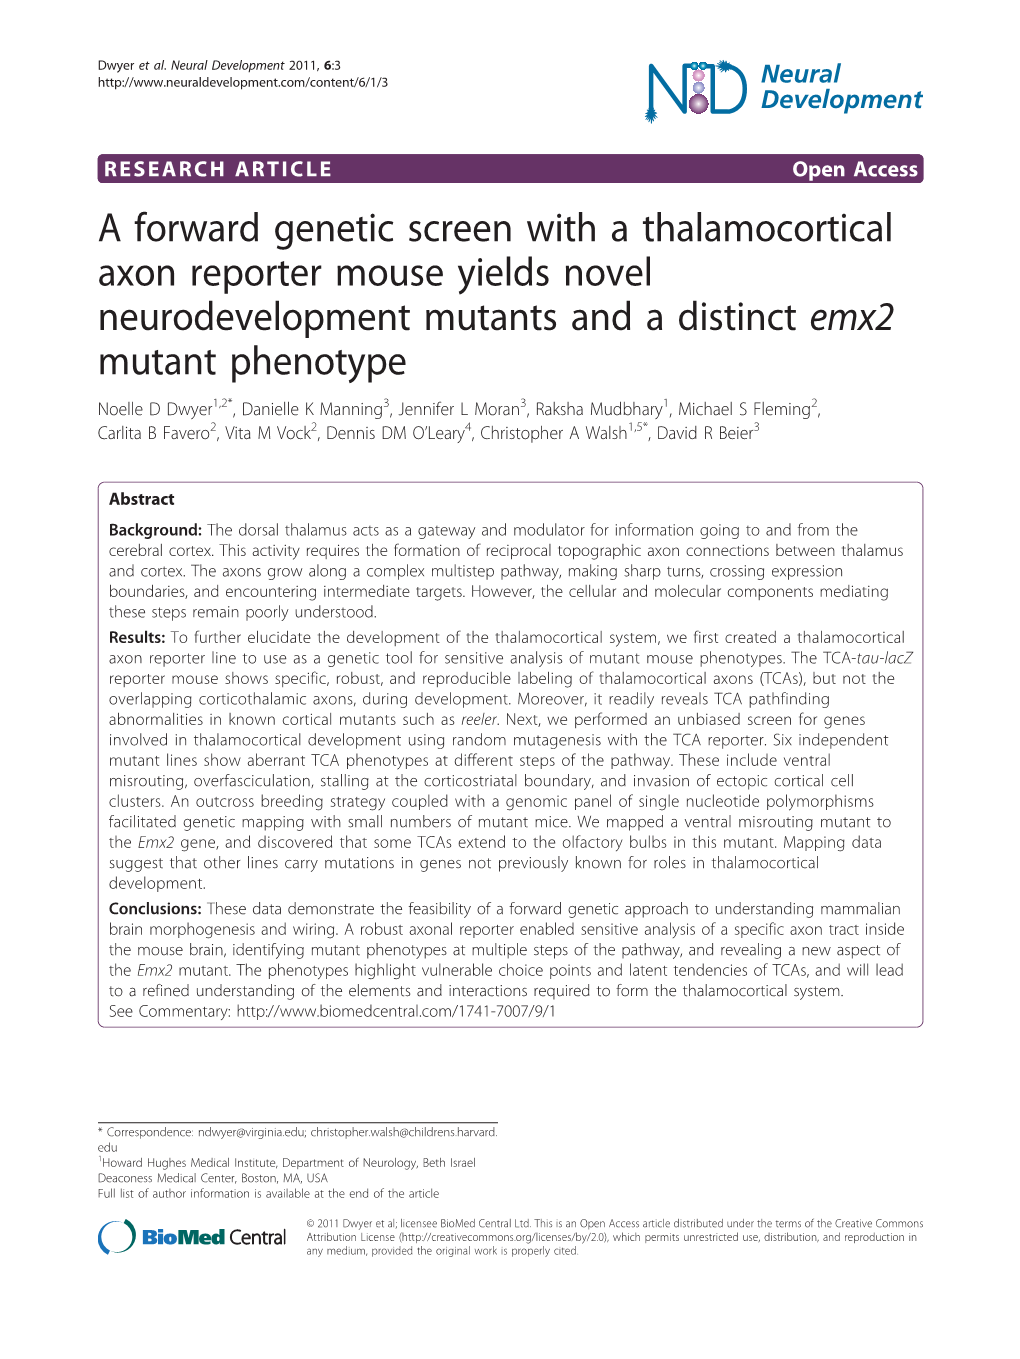 A Forward Genetic Screen with a Thalamocortical Axon Reporter